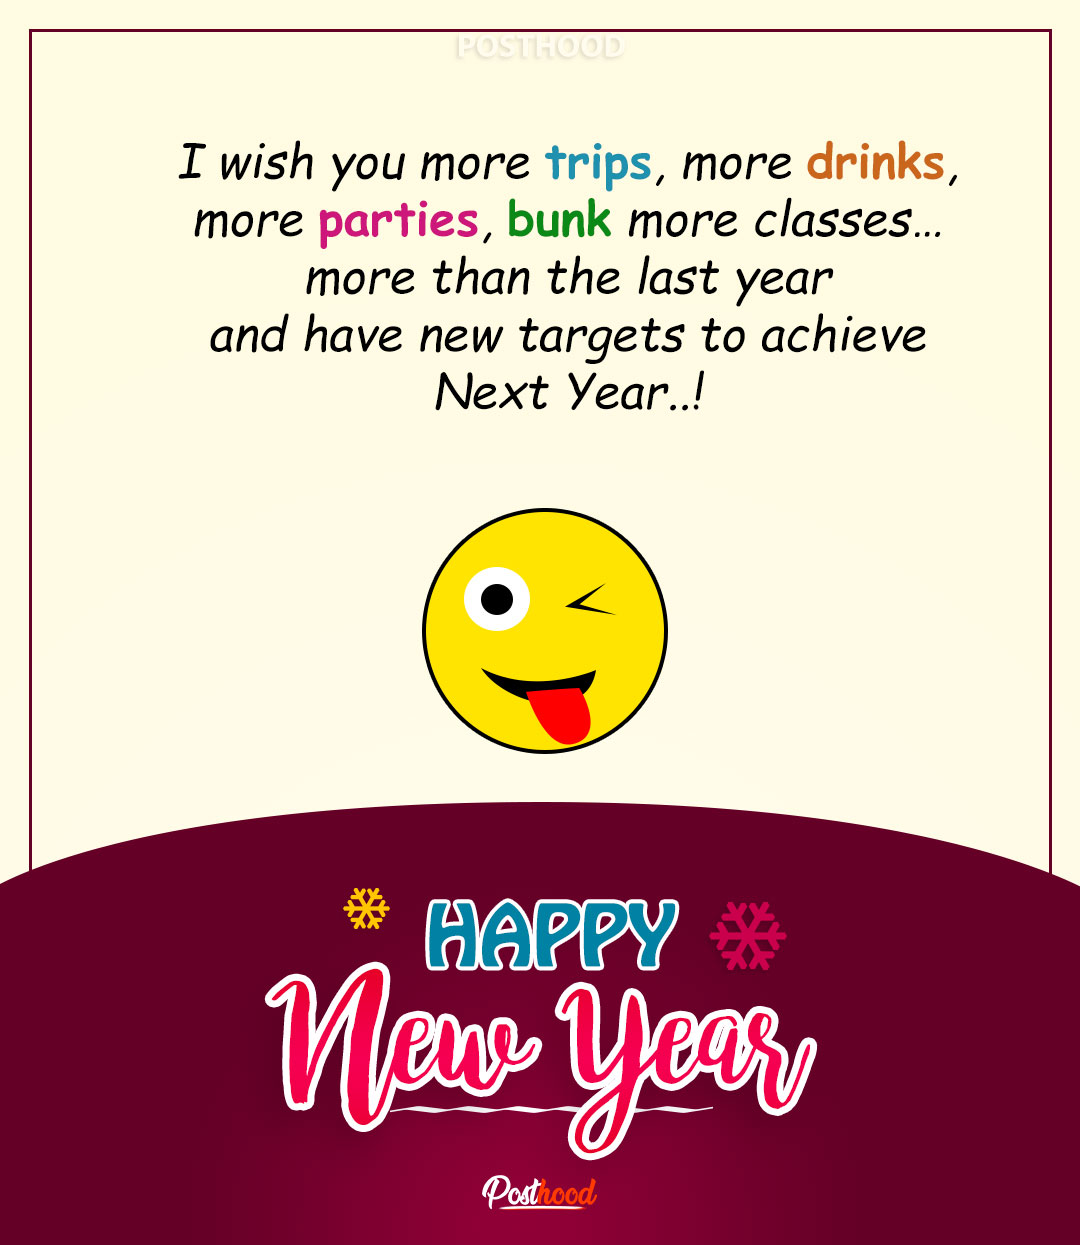 Most hilarious and funny New Year wishes for best friend and buddy. Have lots of fun and drama this Year too and enjoy!